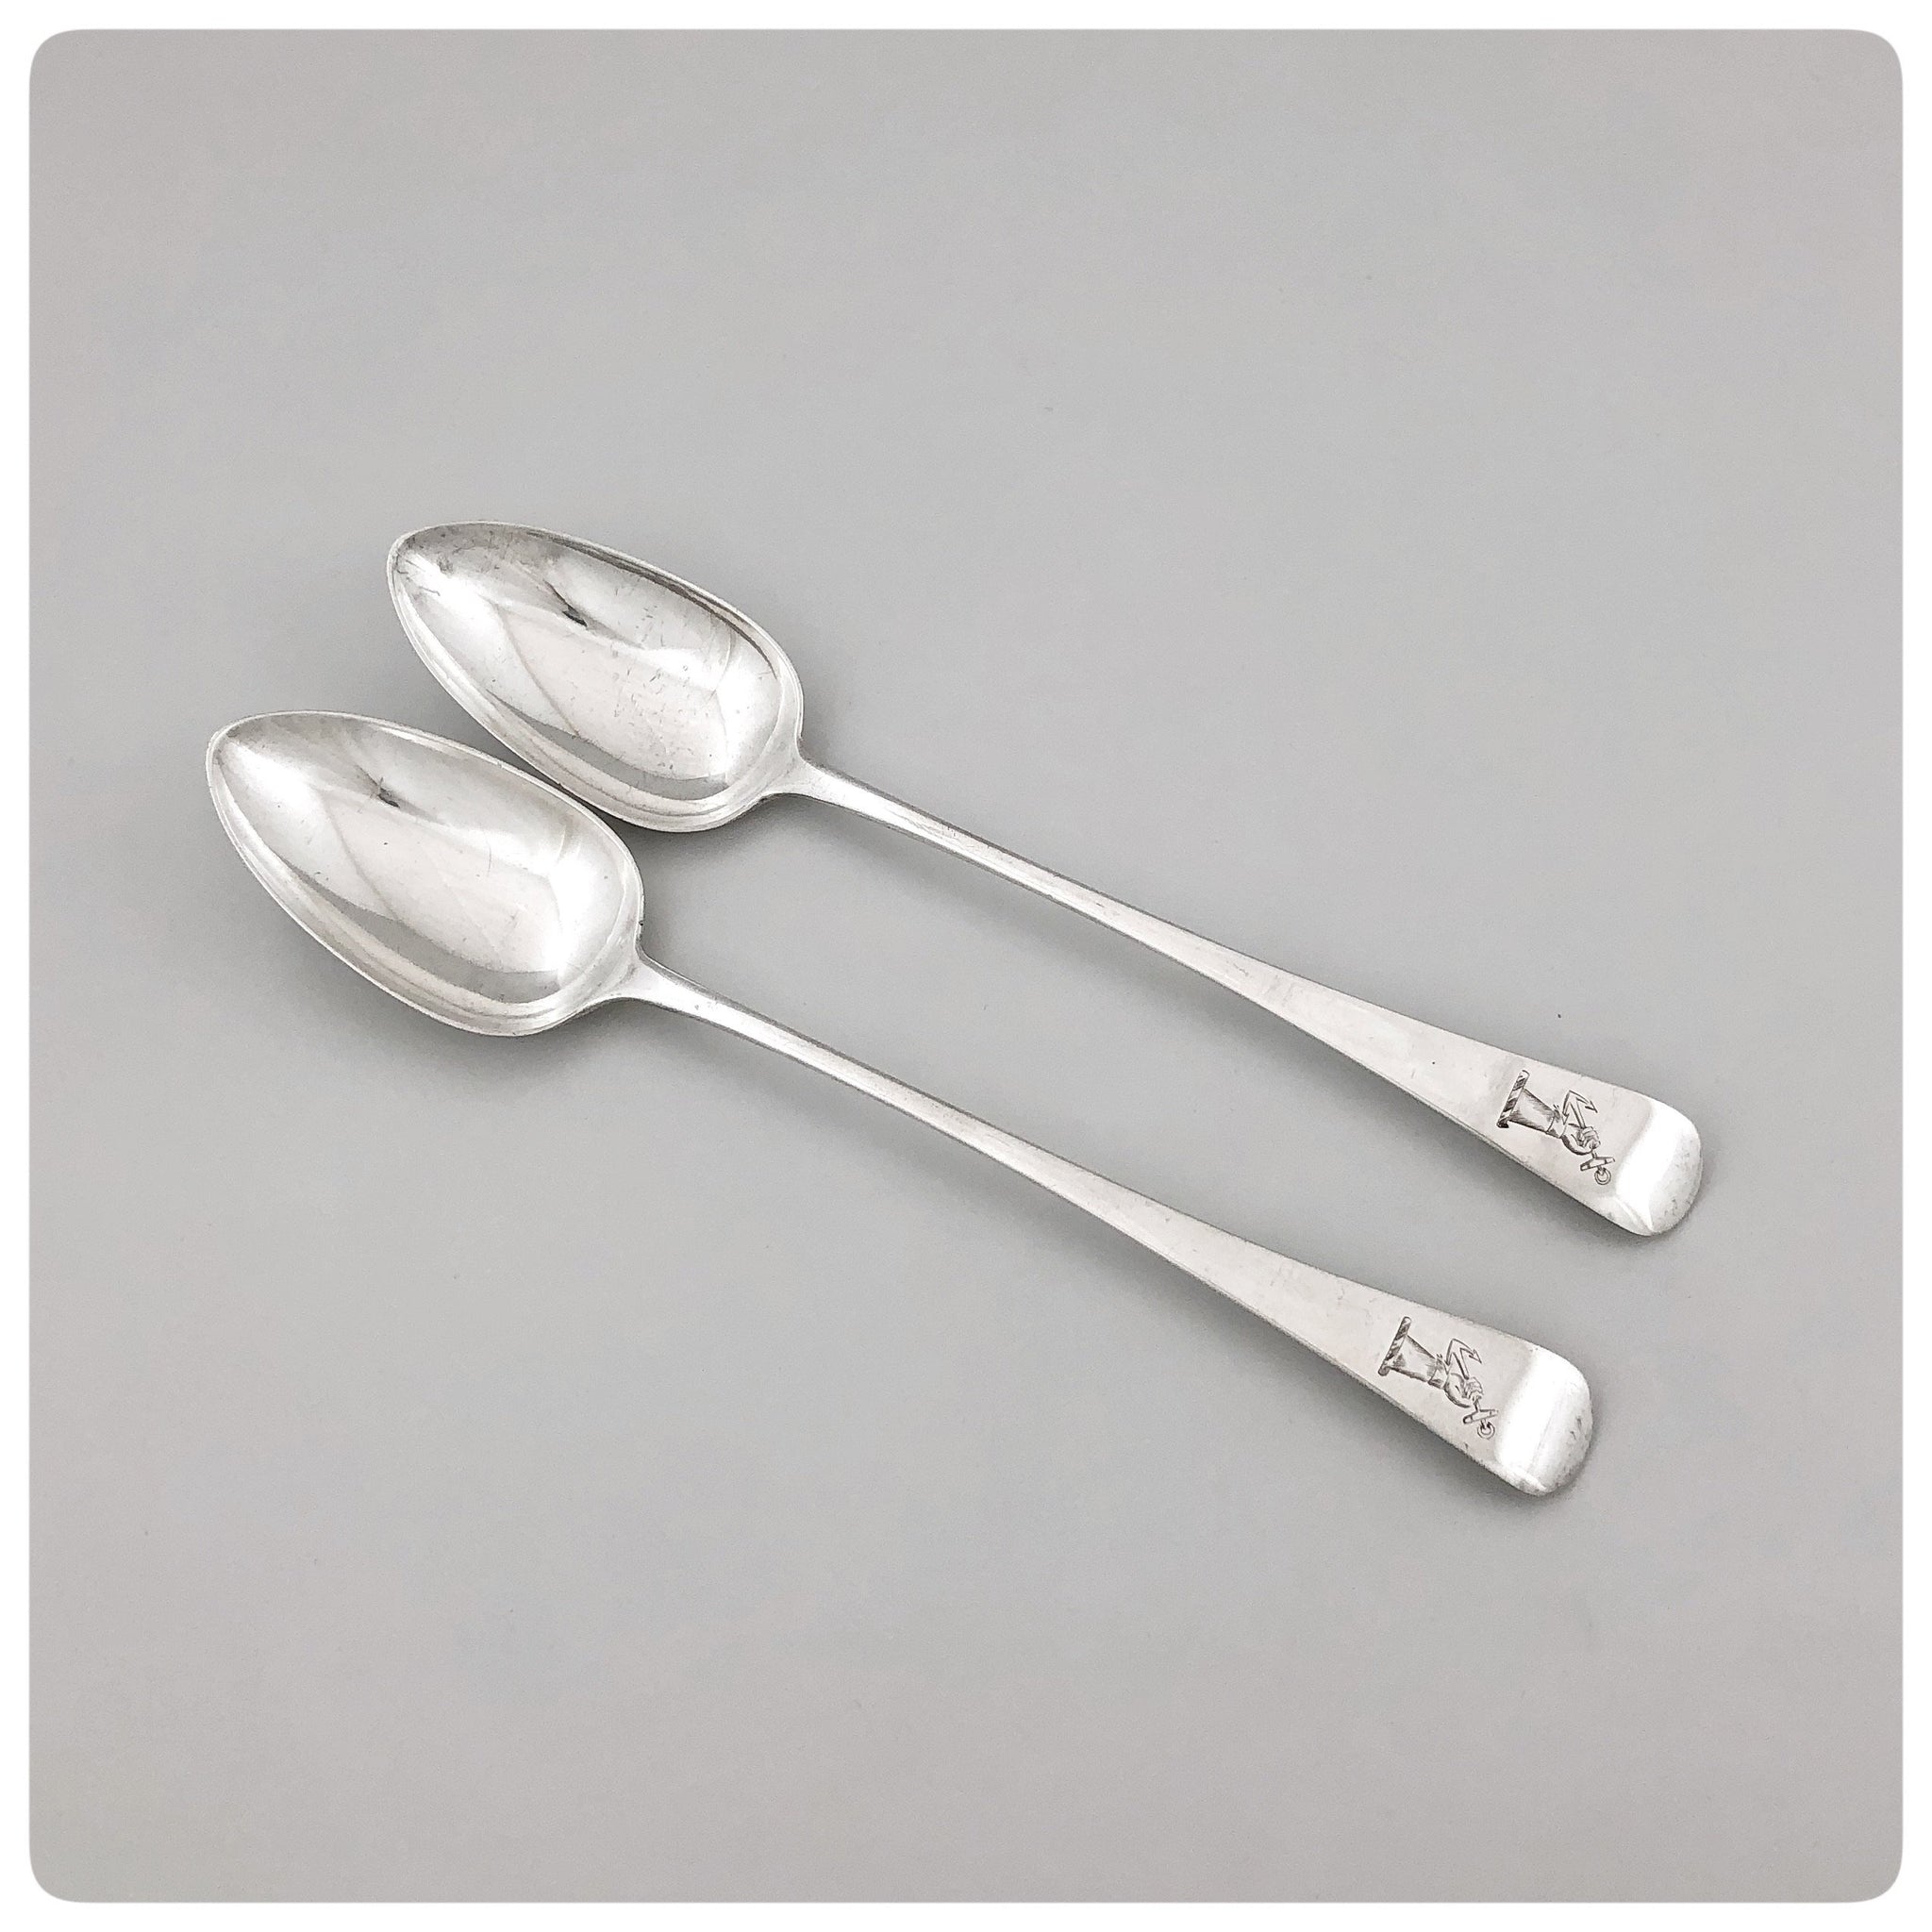 Pair of English Sterling Silver Rice / Stuffing / Platter Spoons, George Smith II, London, 1806-1807 - The Silver Vault of Charleston